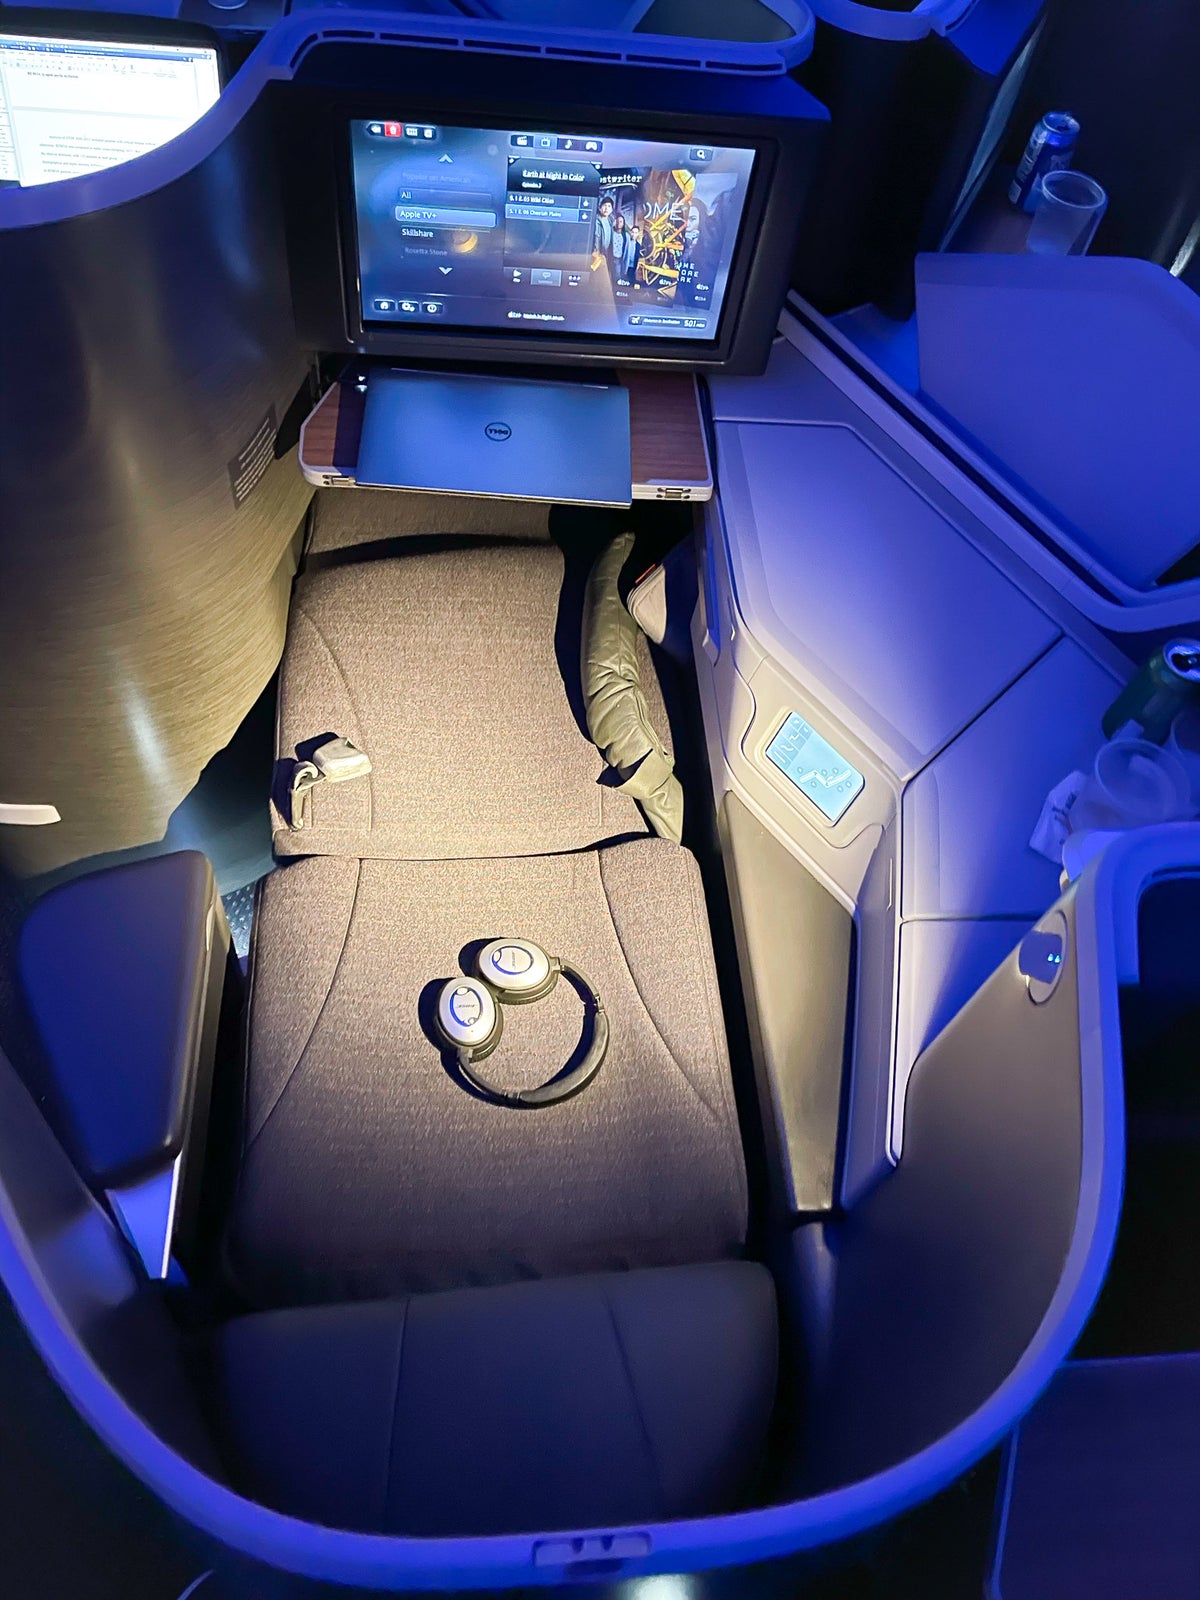 American Airlines First Flagship Business Class Miami to Boston lie flat seat with bose headphones